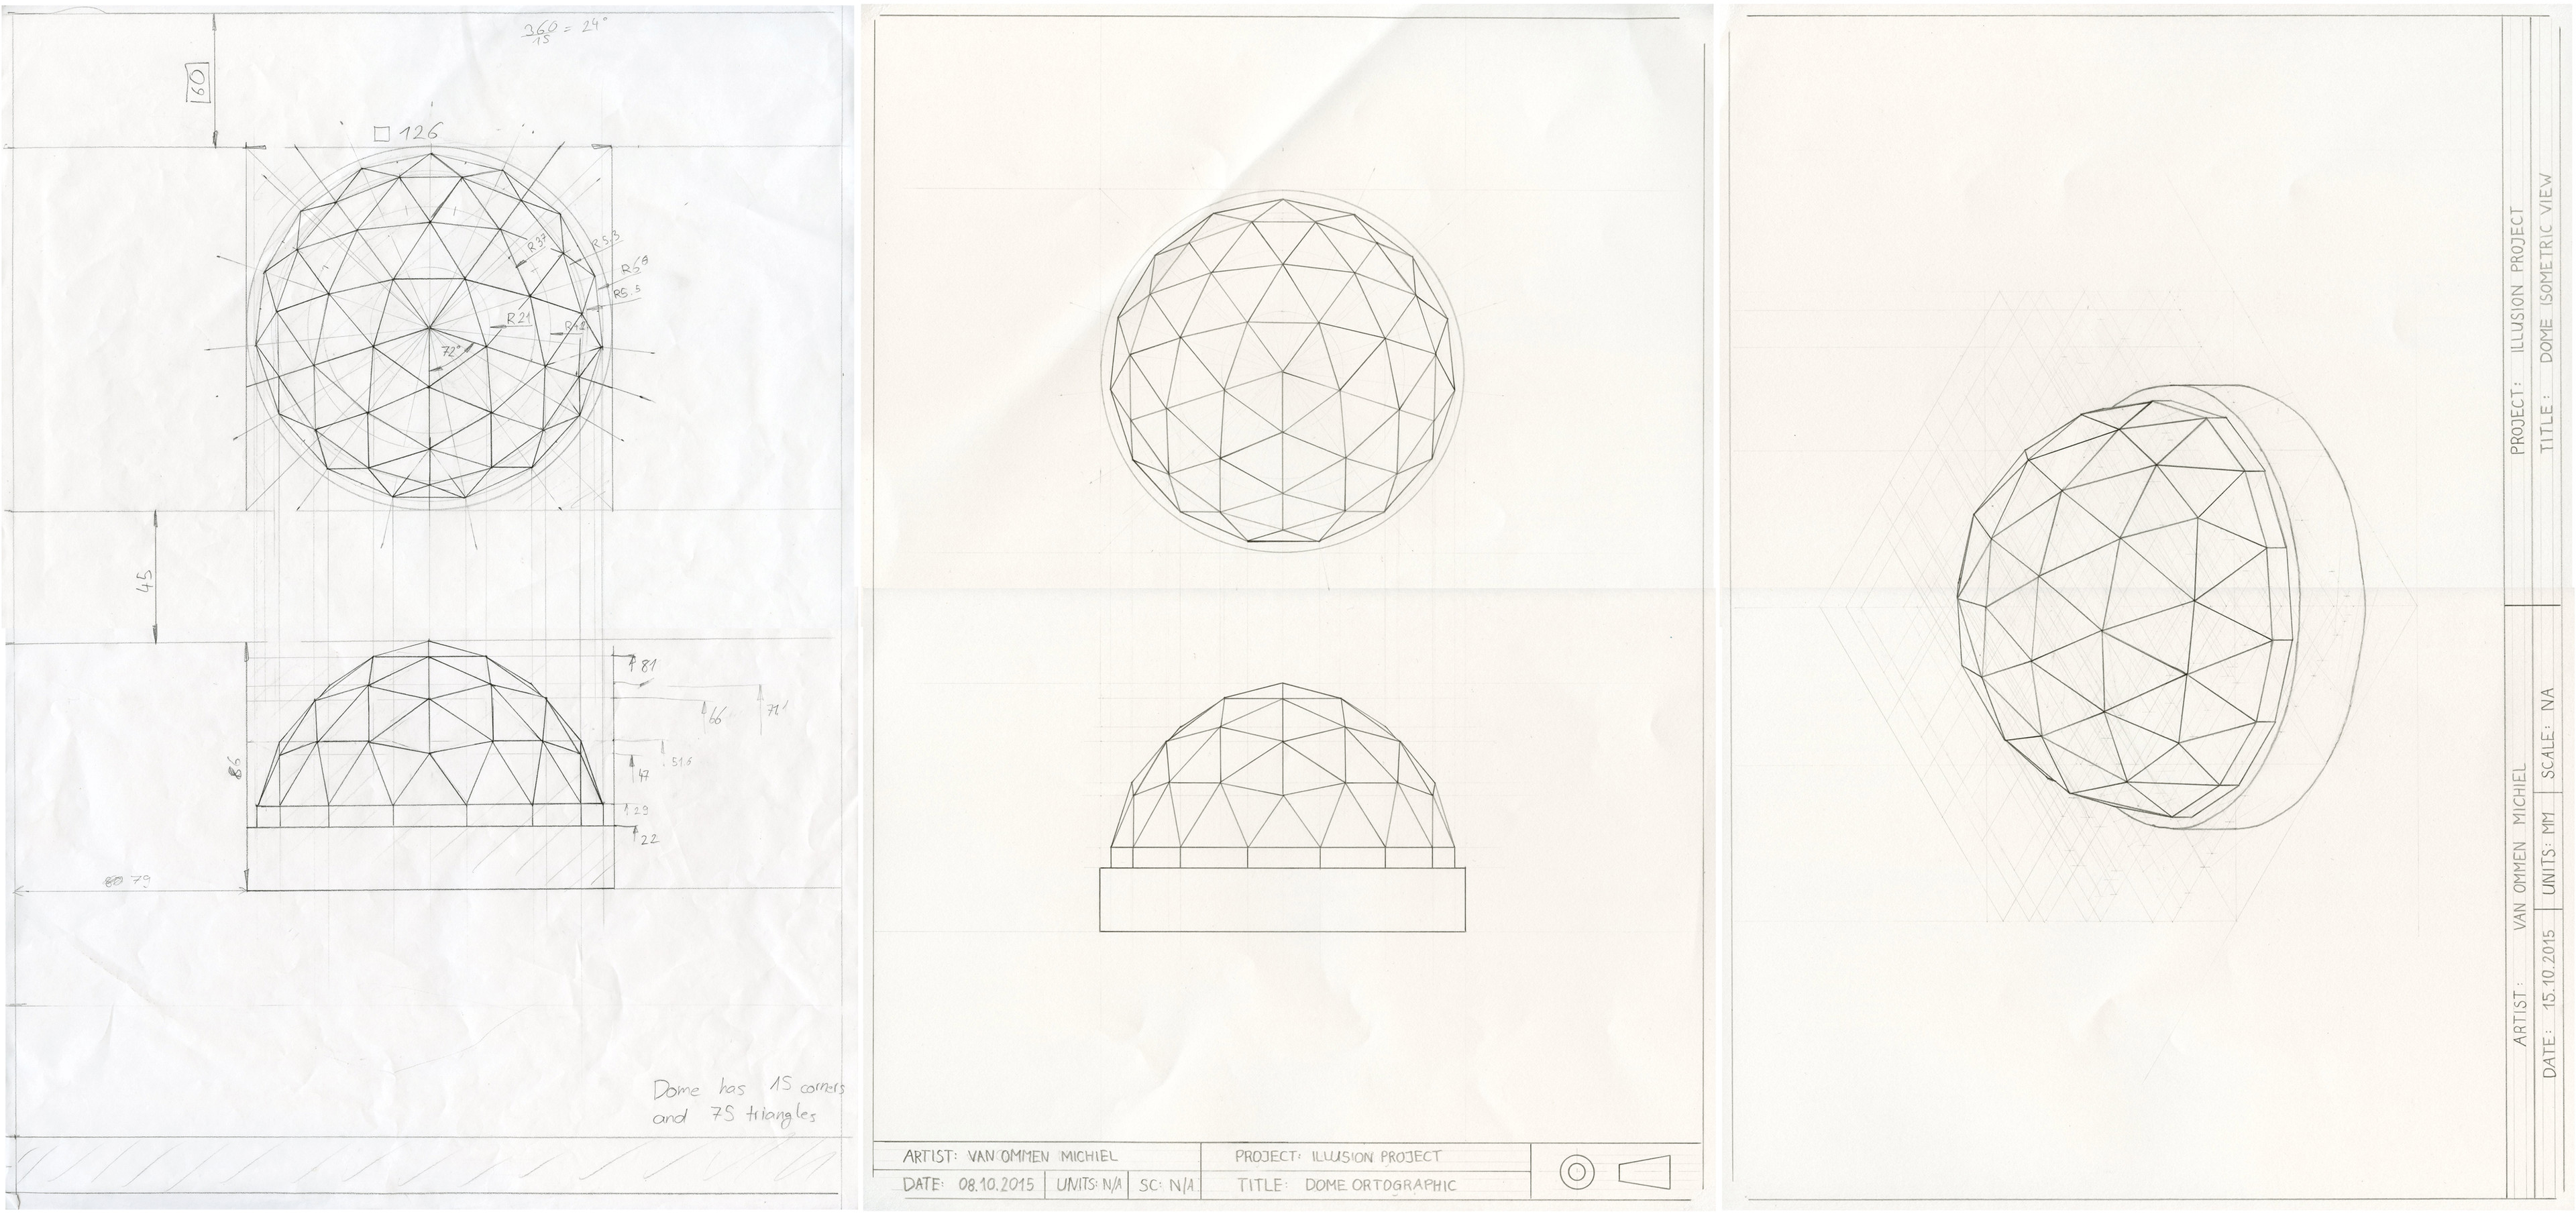 Process of creating a dome made out of triangles - from sketch to isometric